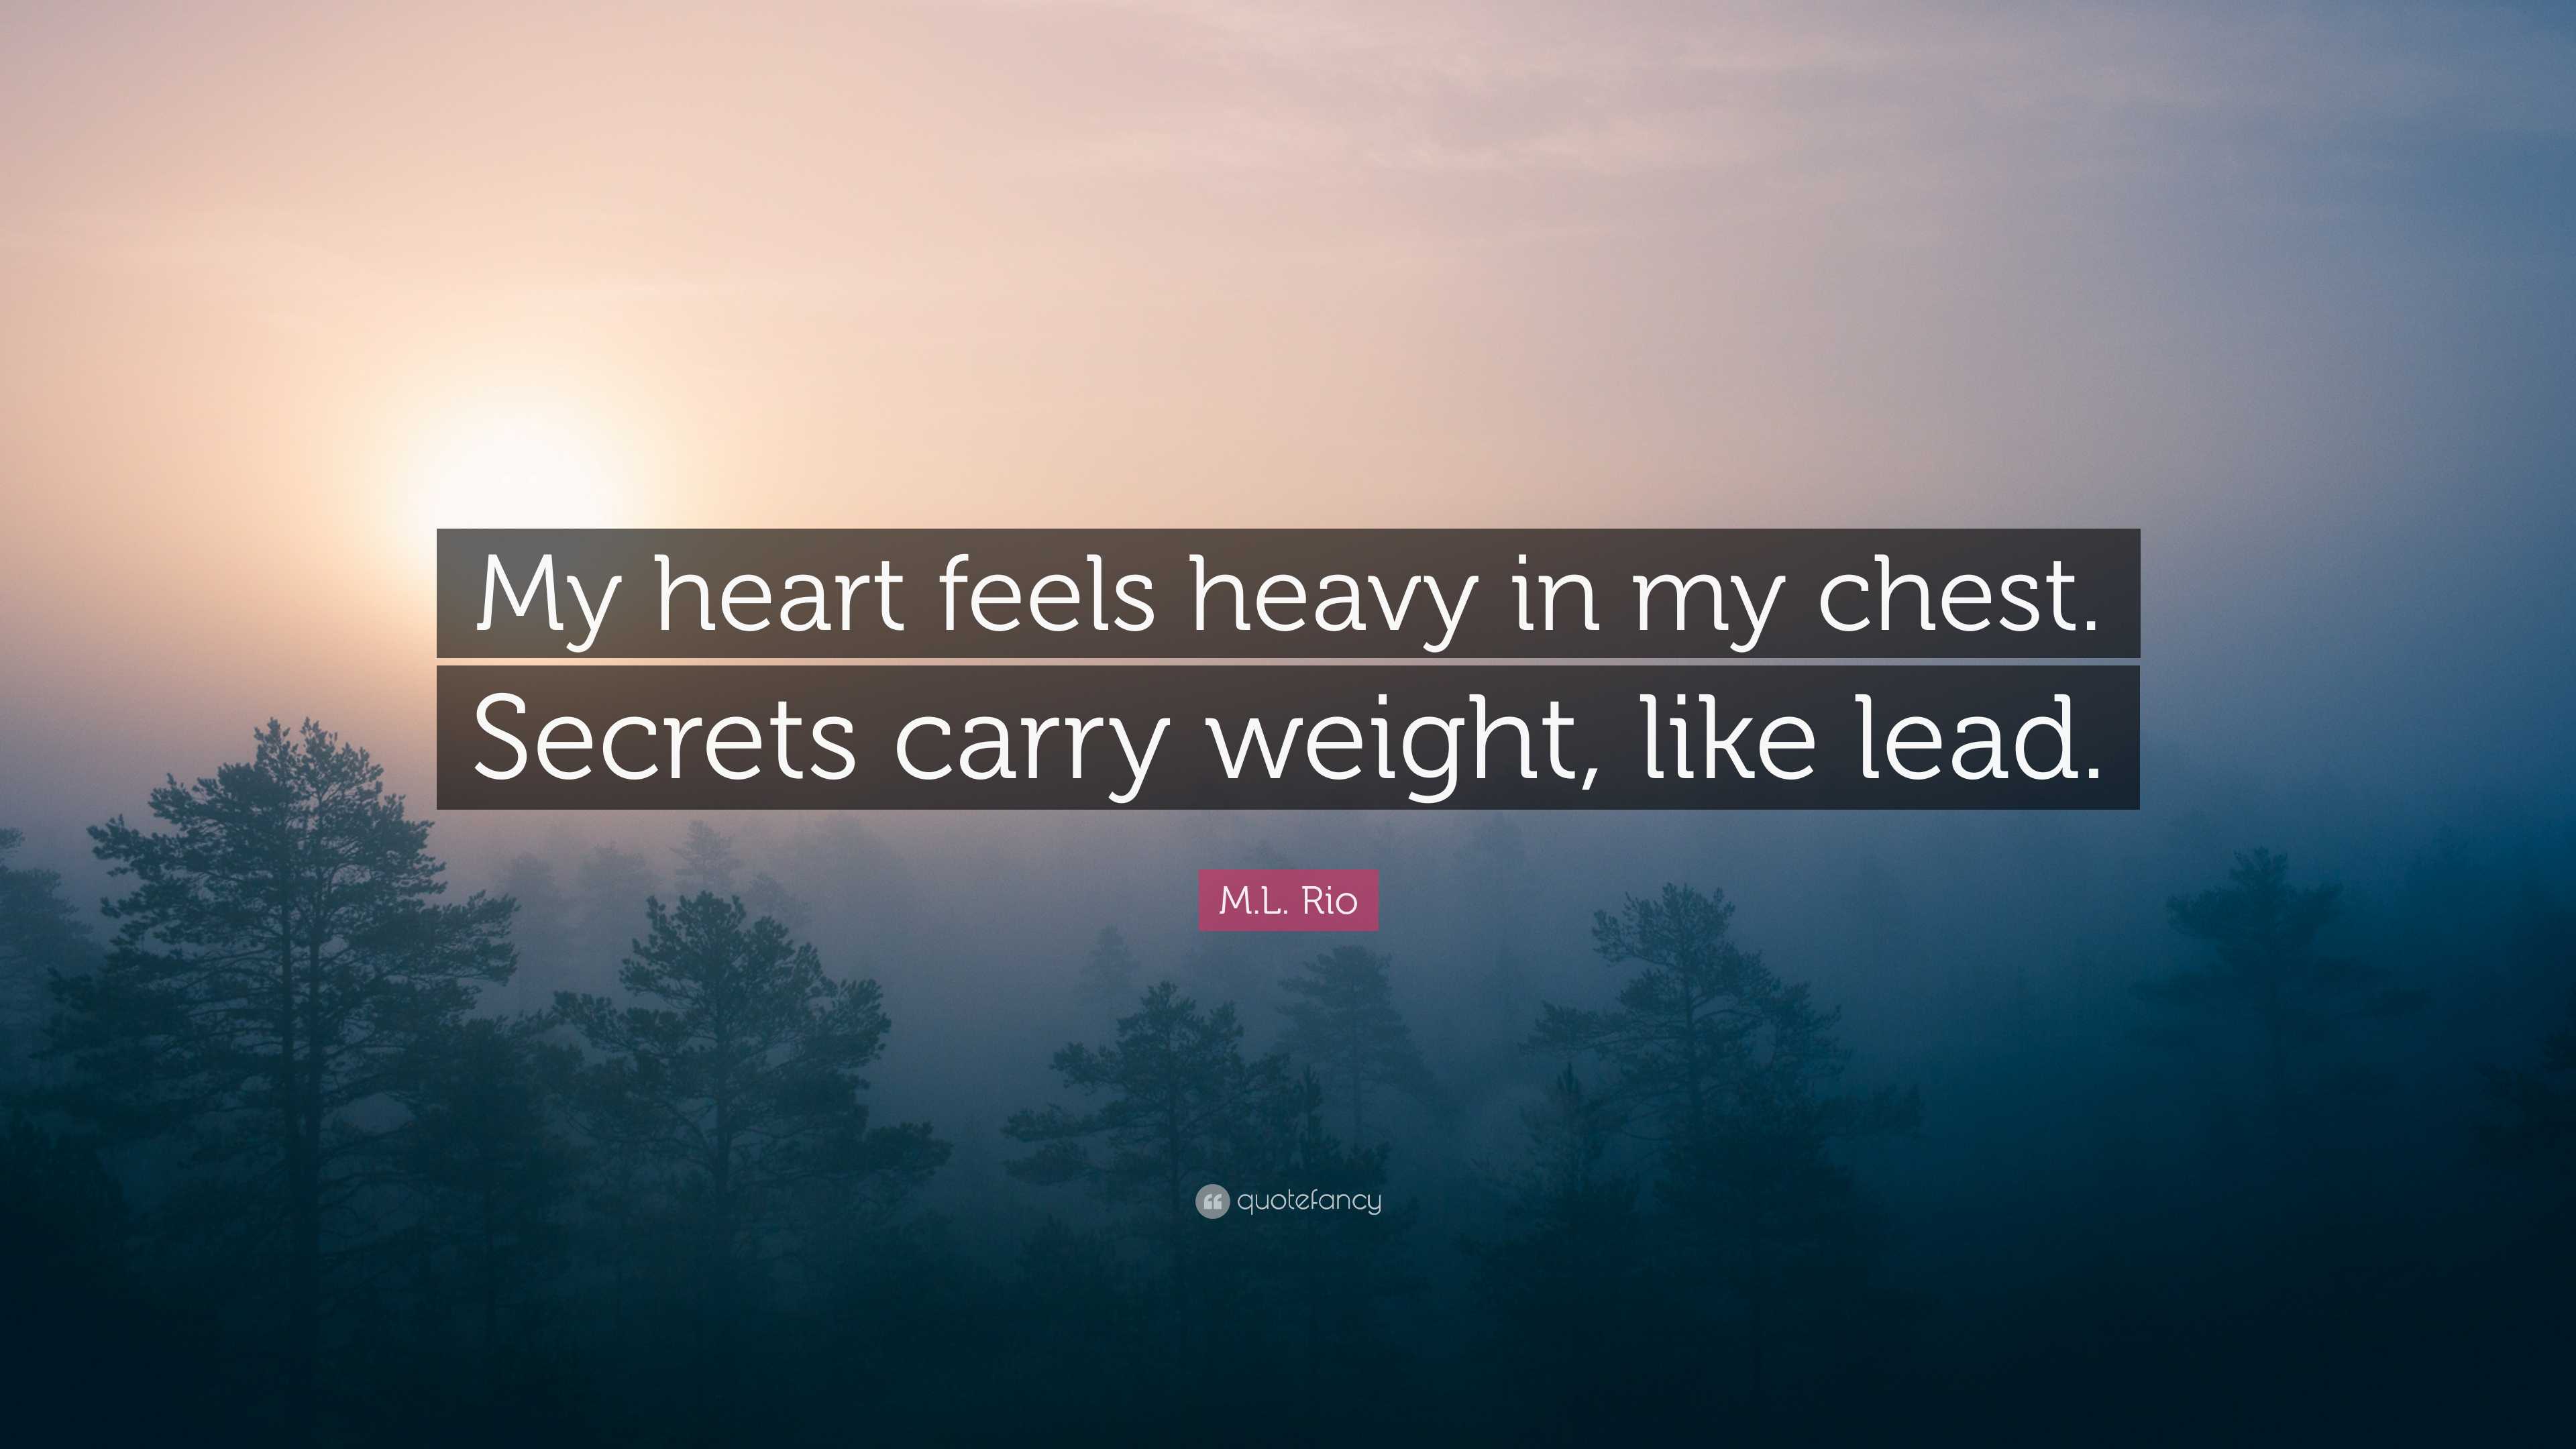 M.L. Rio Quote: “My heart feels heavy in my chest. Secrets carry